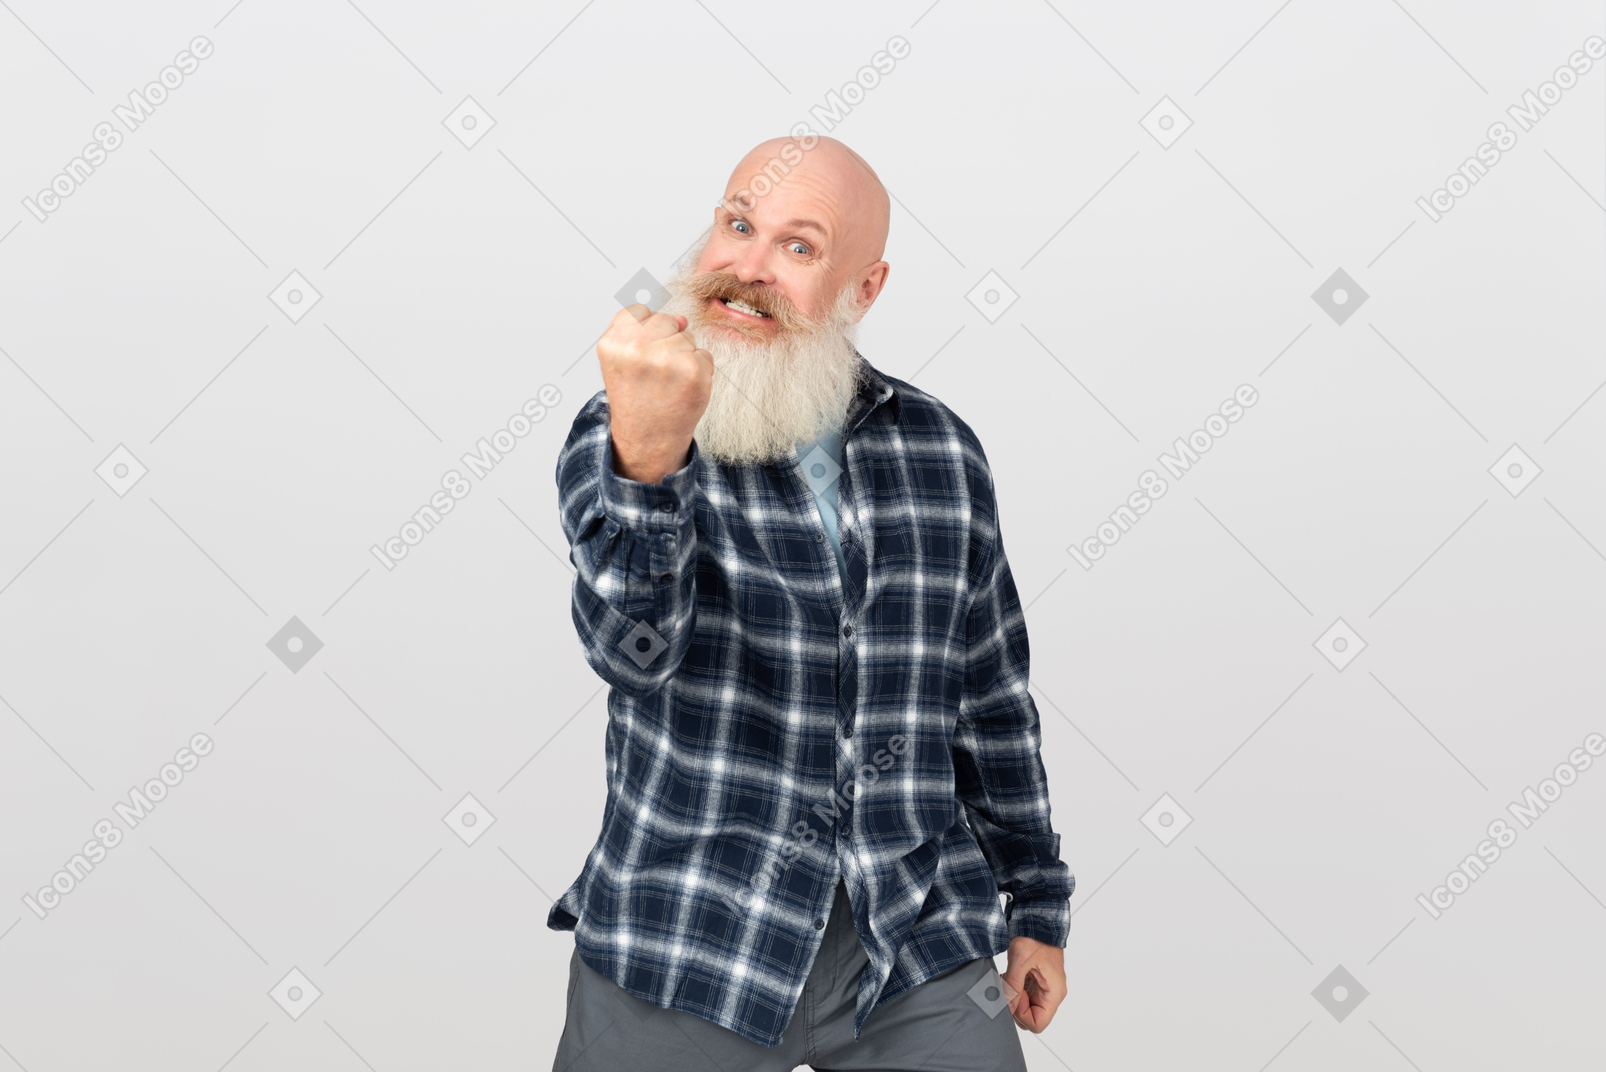 Angry mature bearded man showing his fist